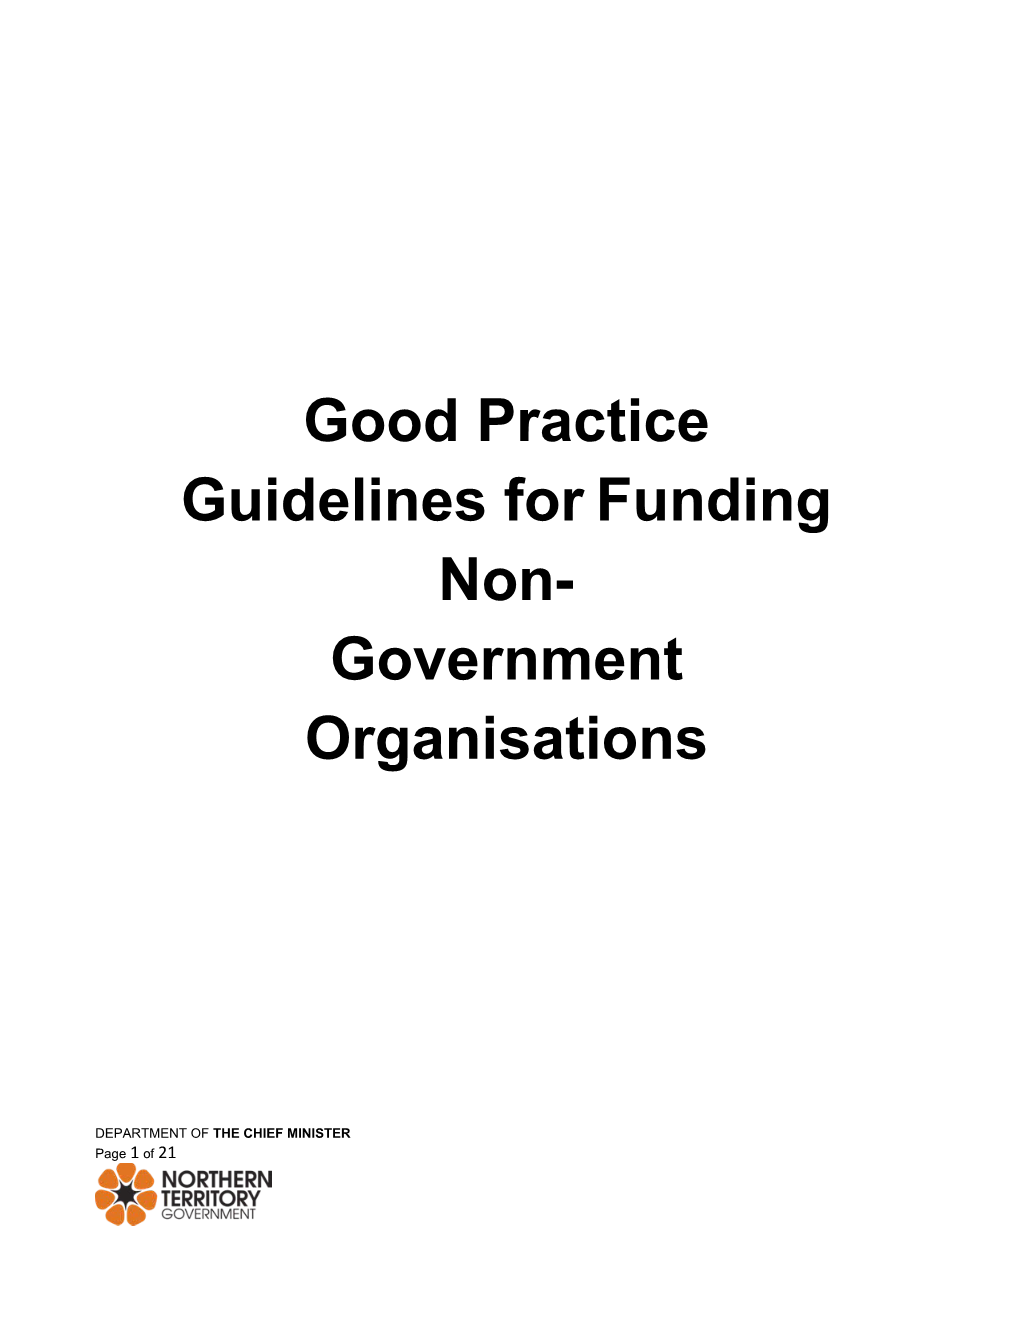 Good Practice Guidelines for Funding Non-Government Organisations